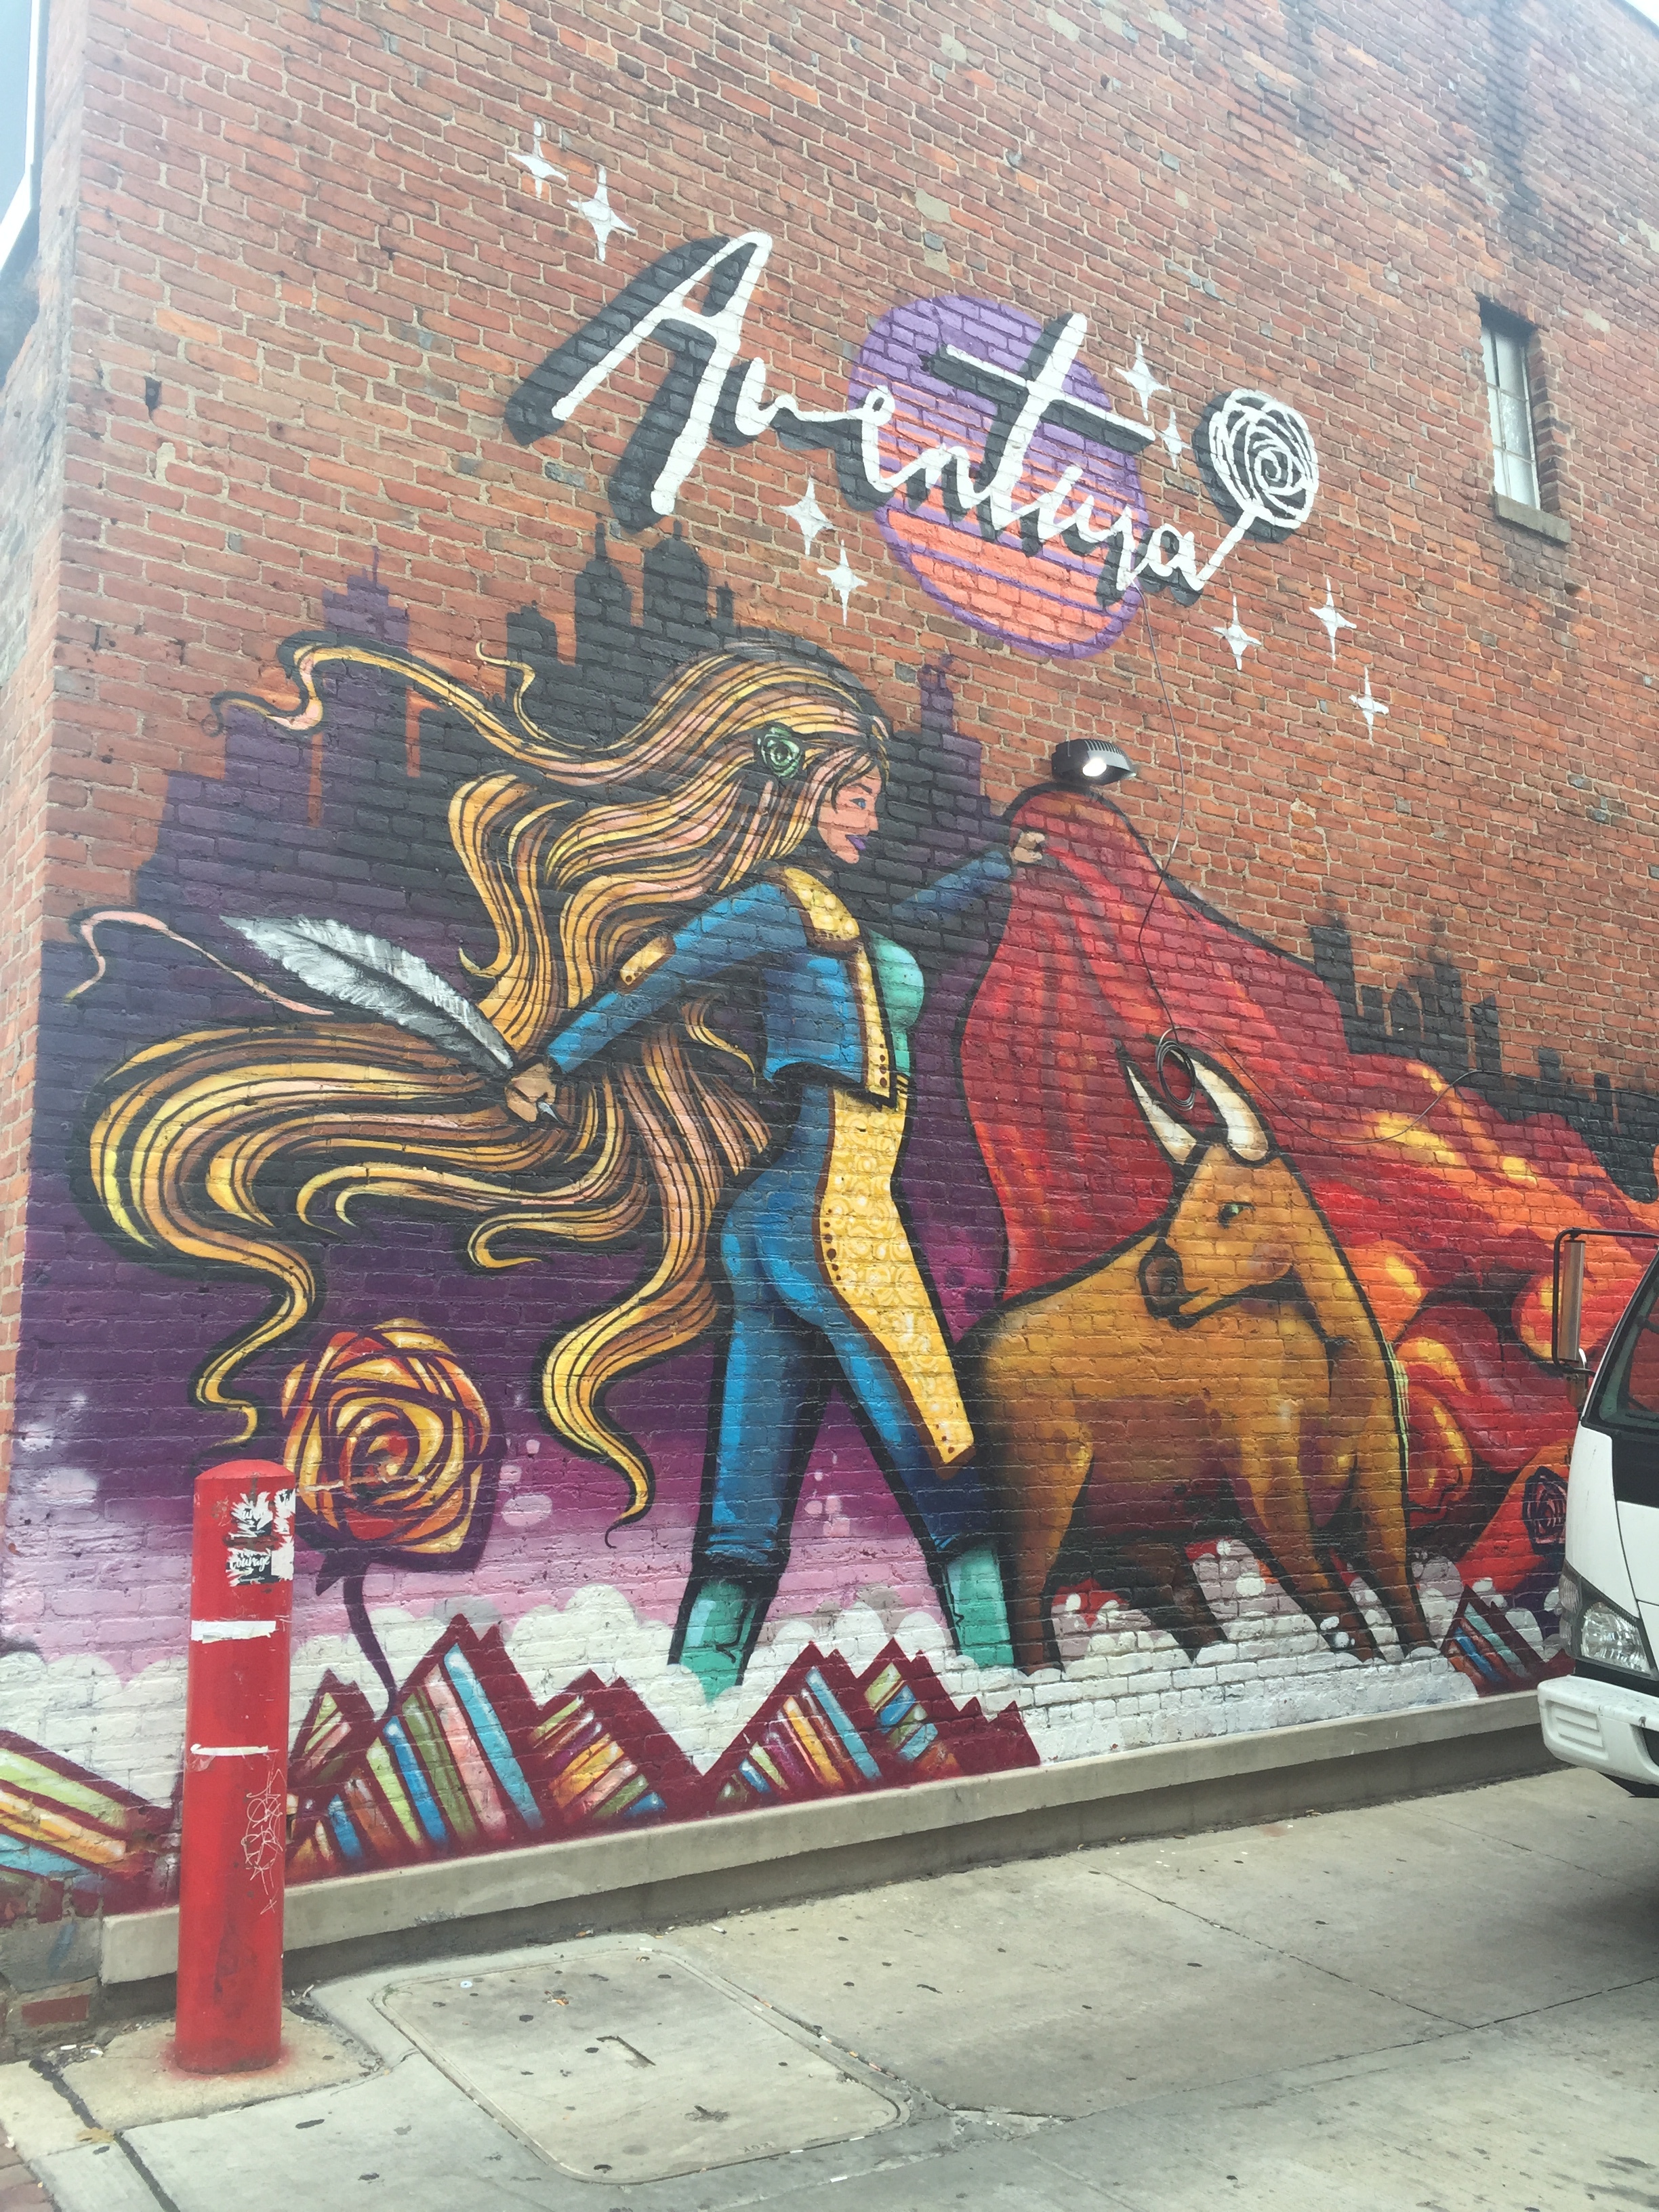 4. Aventura: This cute Spanish tapas spot comes complete with a mural of a woman bullfighter, which is very rare in a male-dominated arena. 